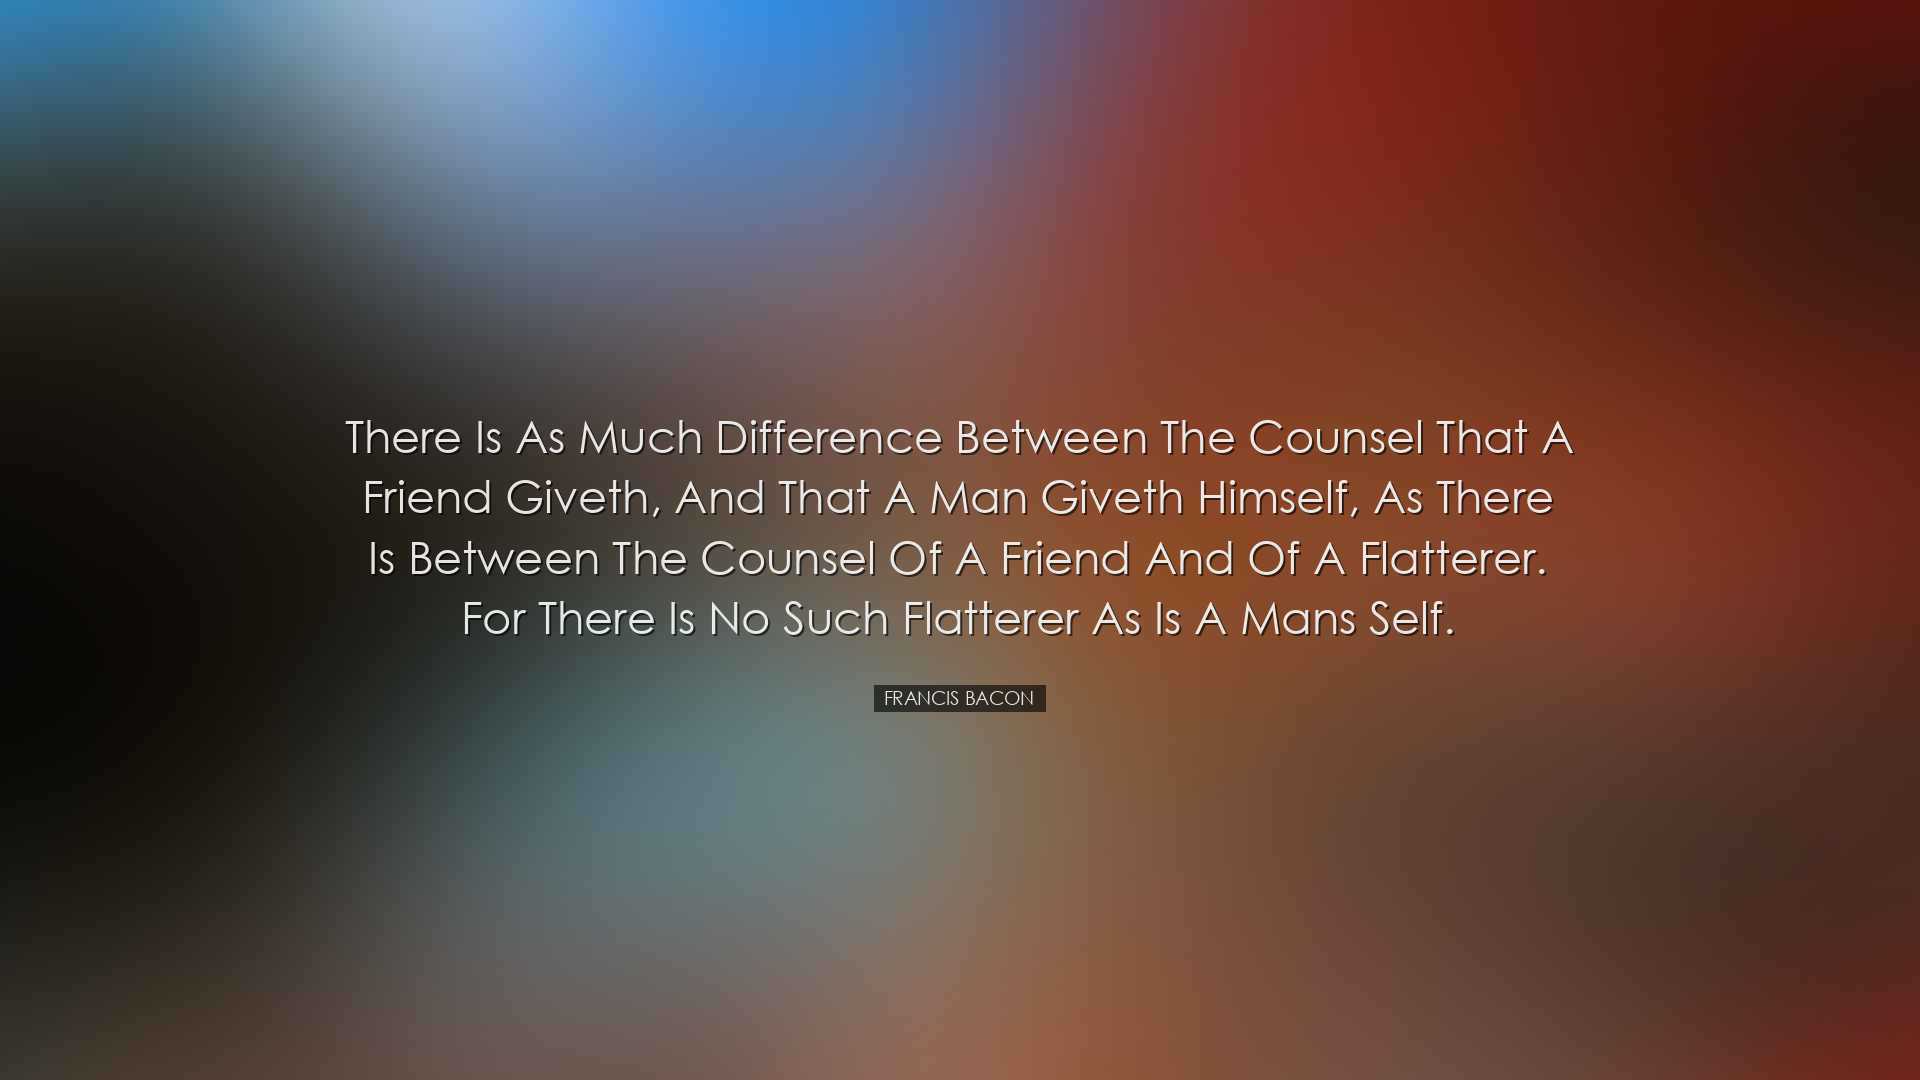 There is as much difference between the counsel that a friend give